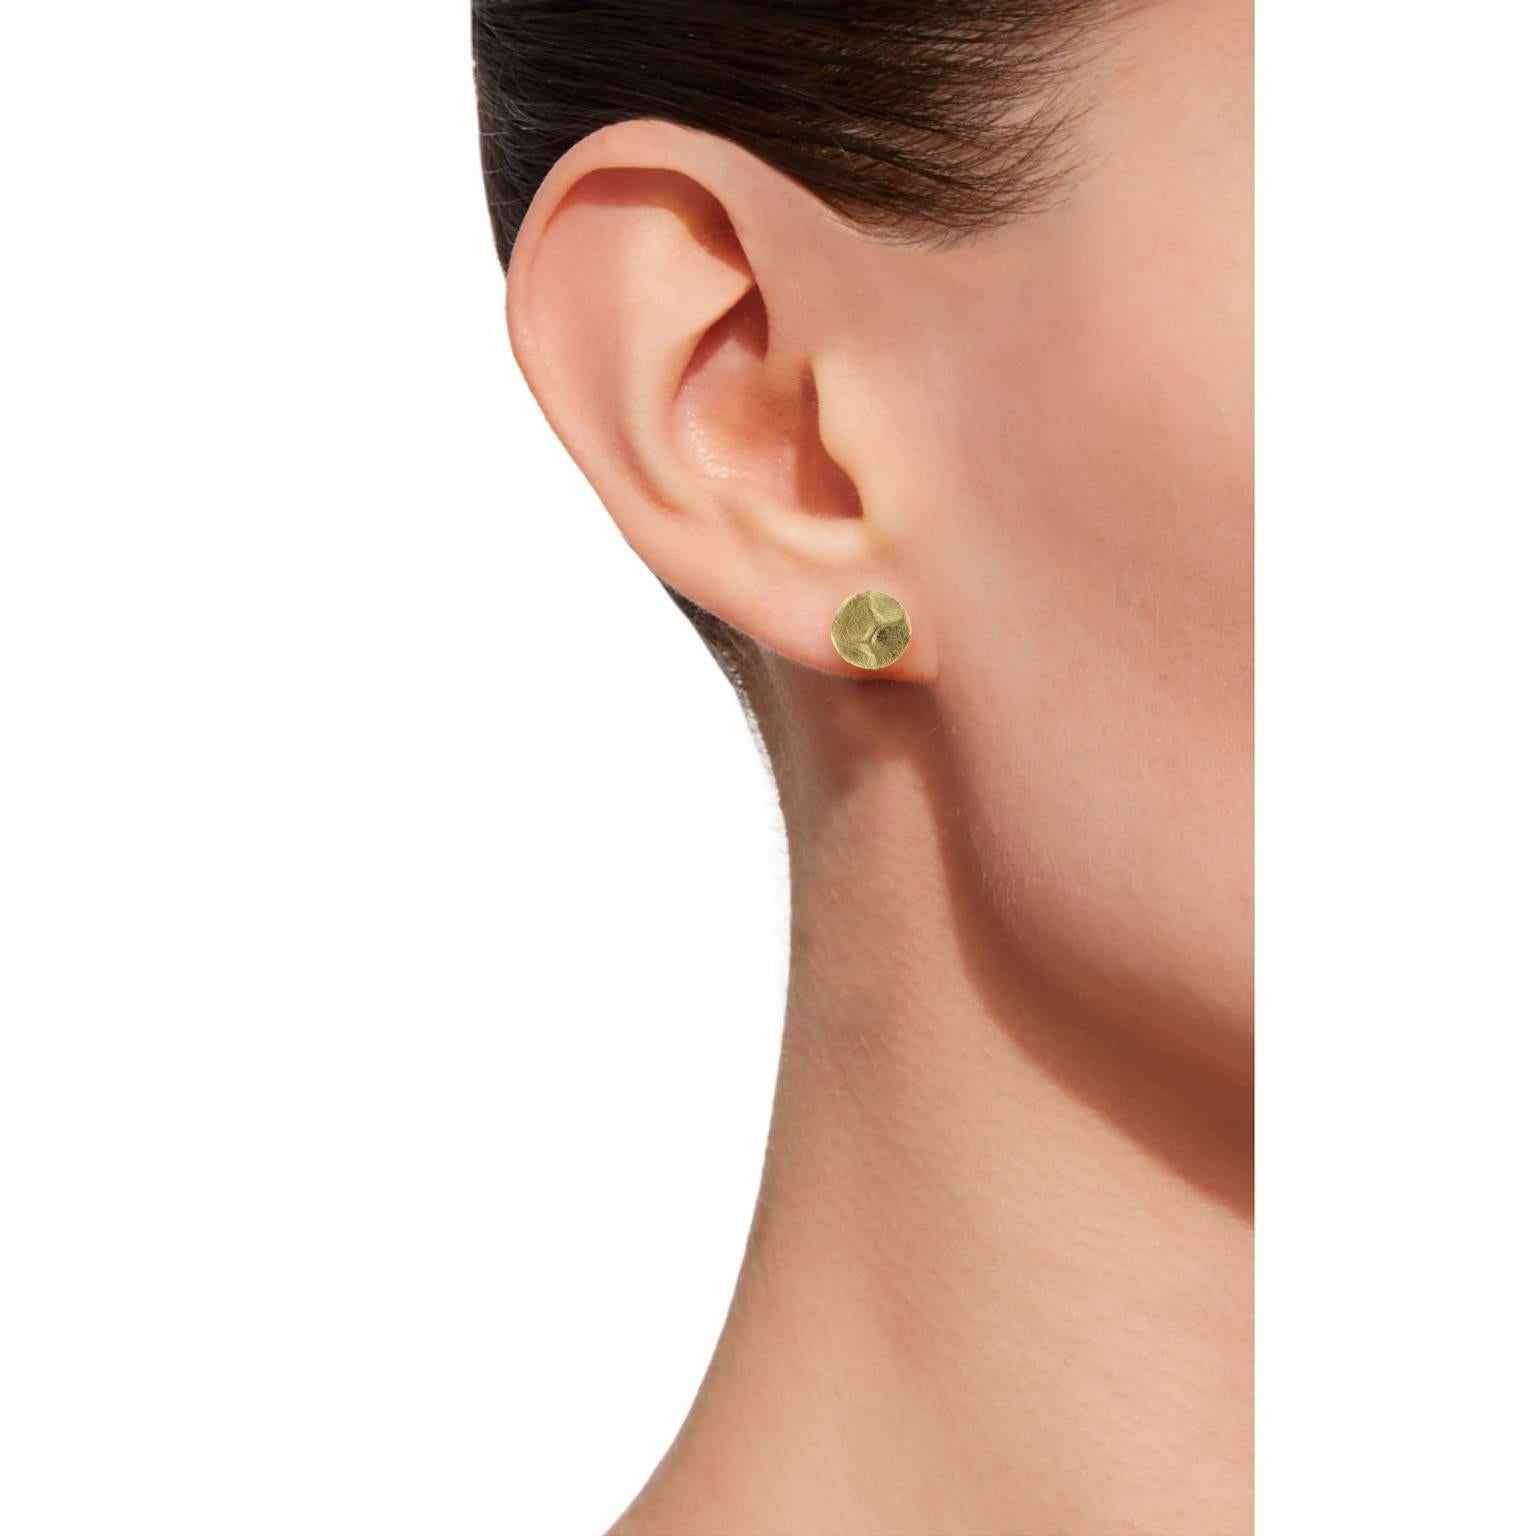 Jona design collection, hand crafted in Italy, 18 karat brushed yellow gold stud earrings. Posts with friction backs for pierced ears. Diameter 0.39